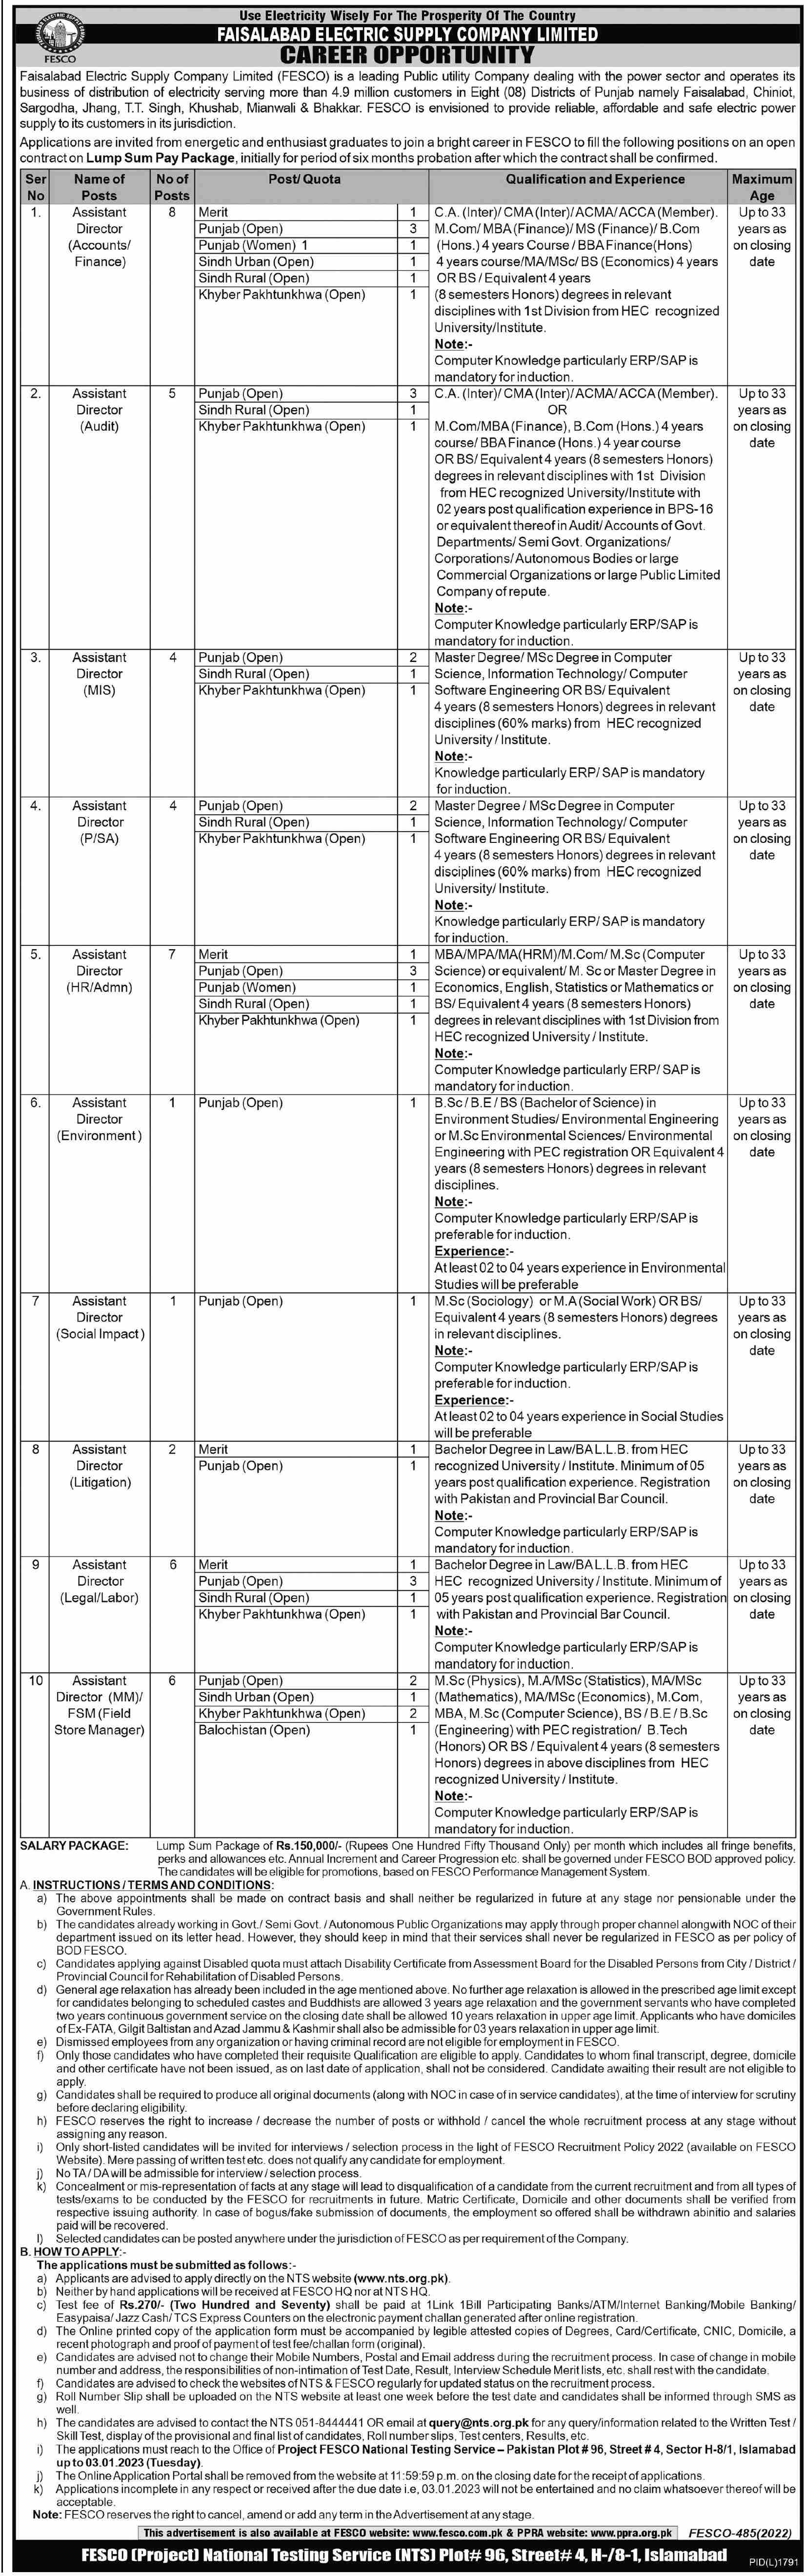 Latest Government jobs in Faisalabad Electric Supply Company Limited FESCO in Management and others can be applied till NaN undefined NaN or as per closing date in newspaper ad. Read complete ad online to know how to apply on latest Faisalabad Electric Supply Company Limited FESCO job opportunities.